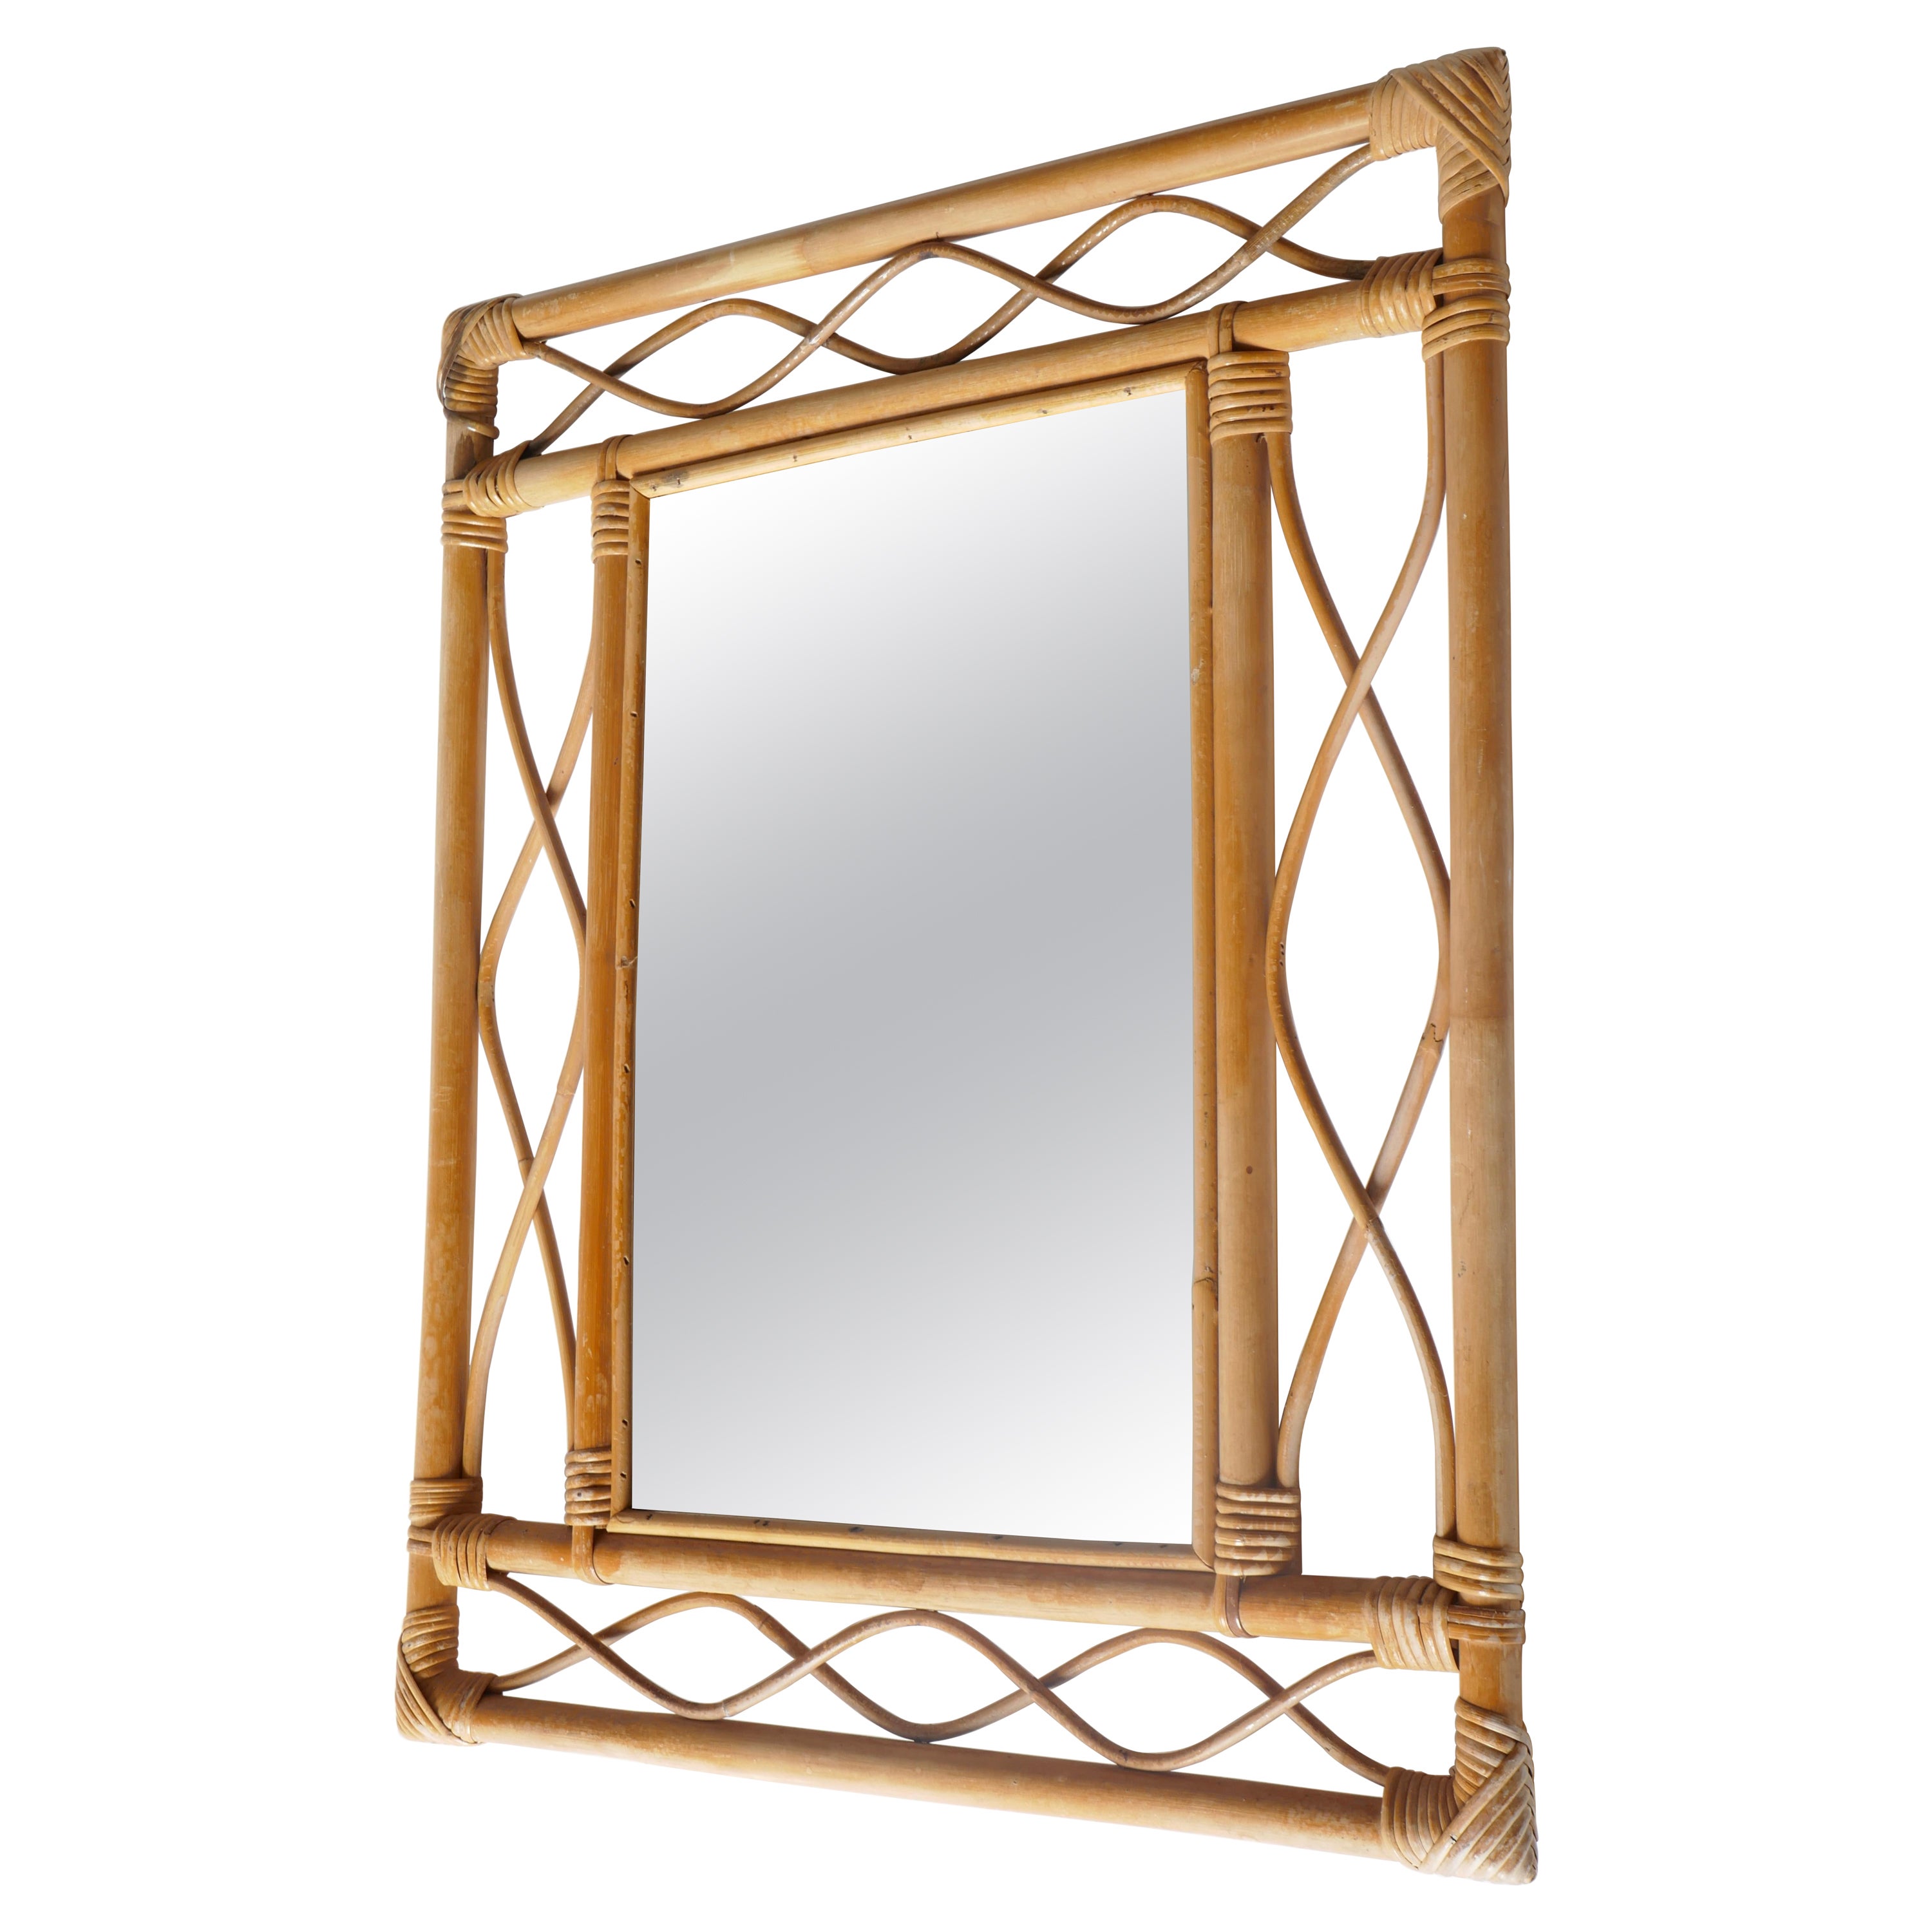 Rectangular Rattan and Bamboo Mirror, France, 1960s For Sale